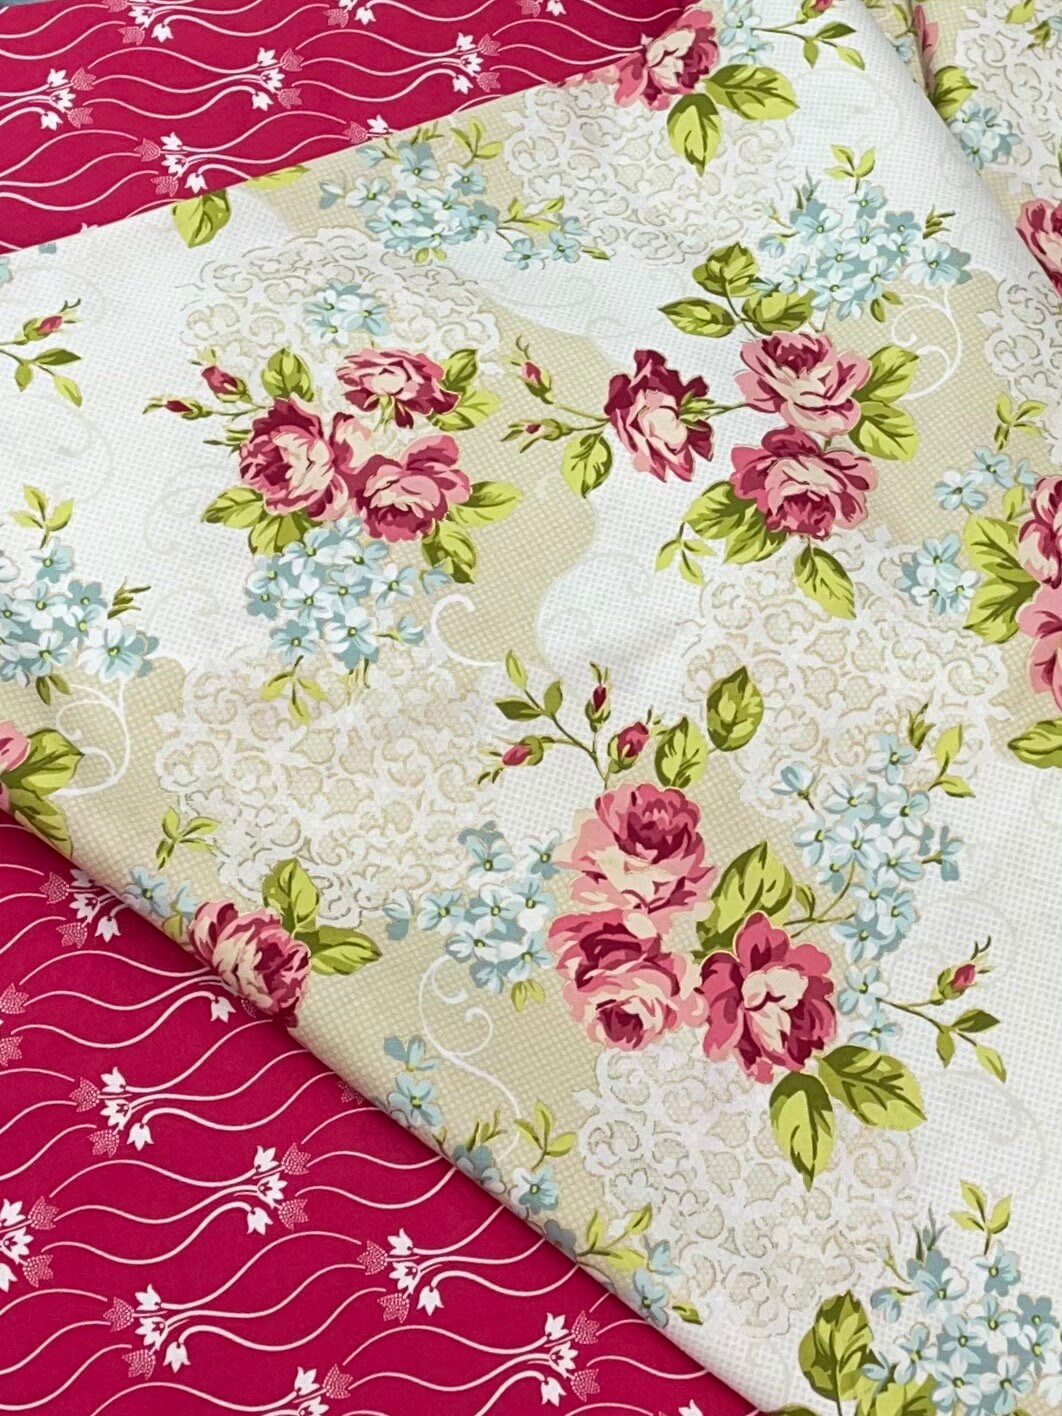 Boundless Flower Shoppe II Floral 1-Yard Fabric Cut Main Floral Red 36x44 inches 